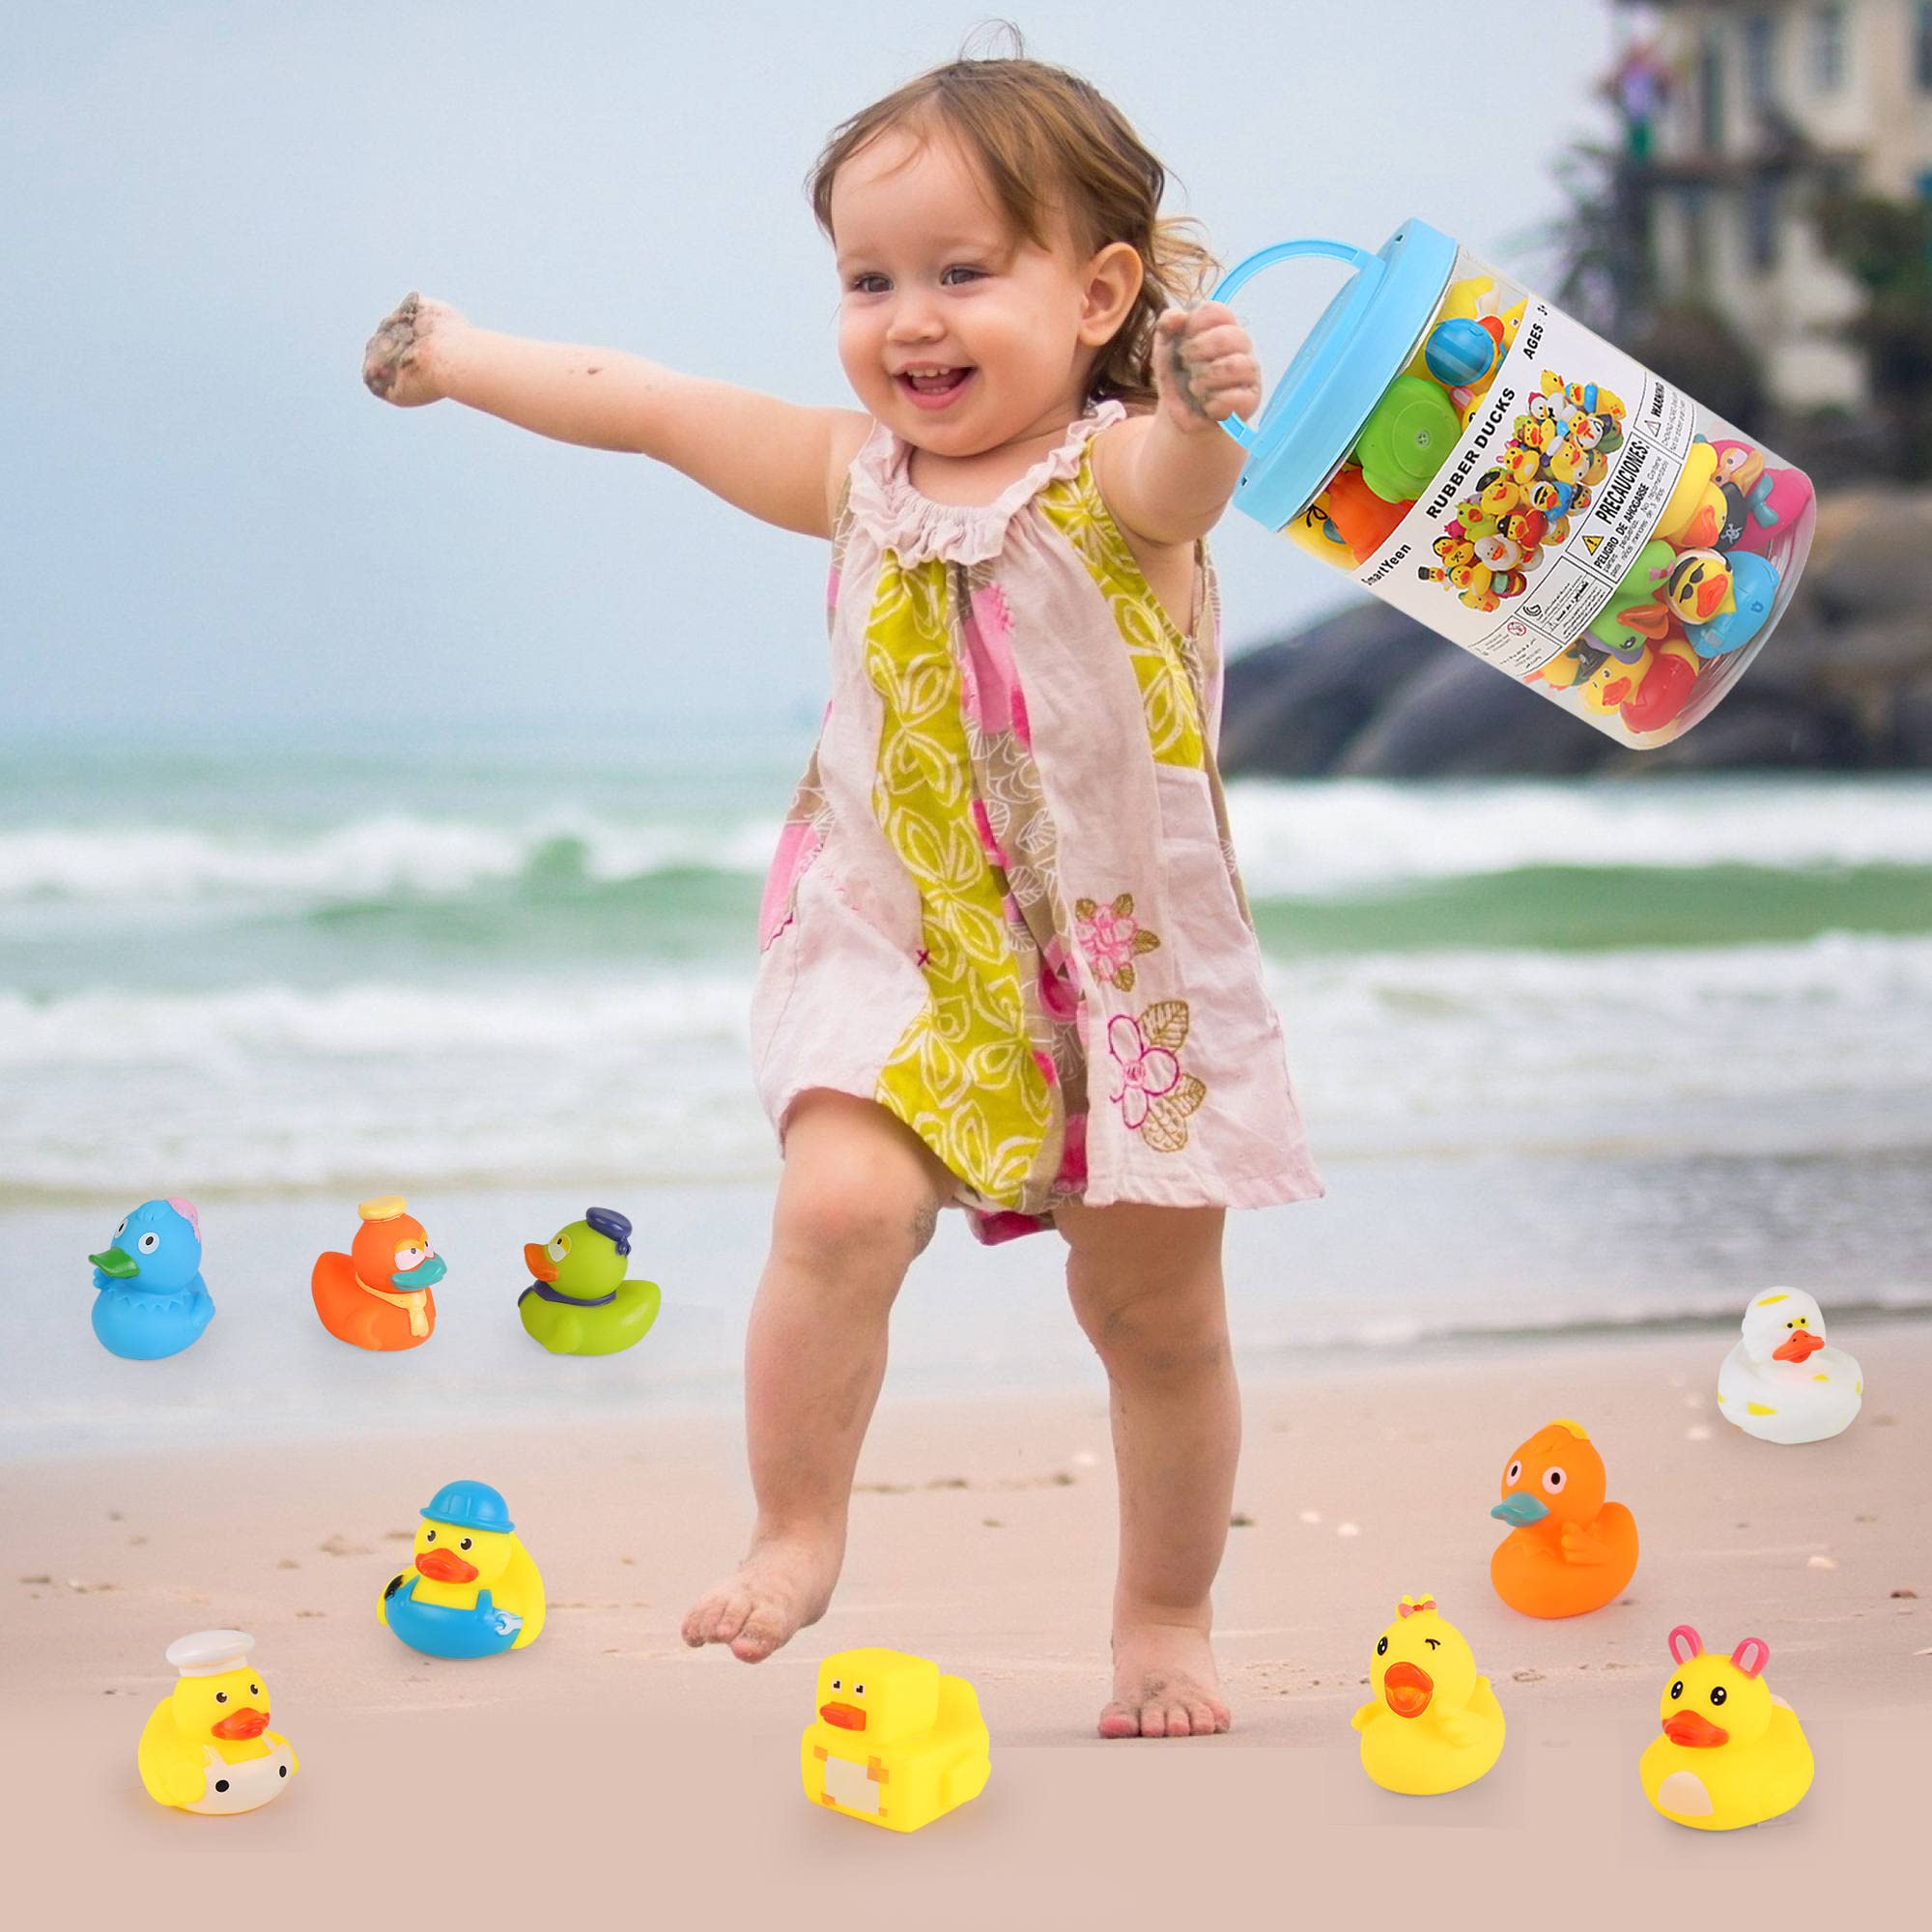 SmartYeen 30pcs Rubber Ducks Bath Toys for Toddlers 1-3,Assorted Duckies bathtime Soft Baby Pool Toys Birthday Gifts